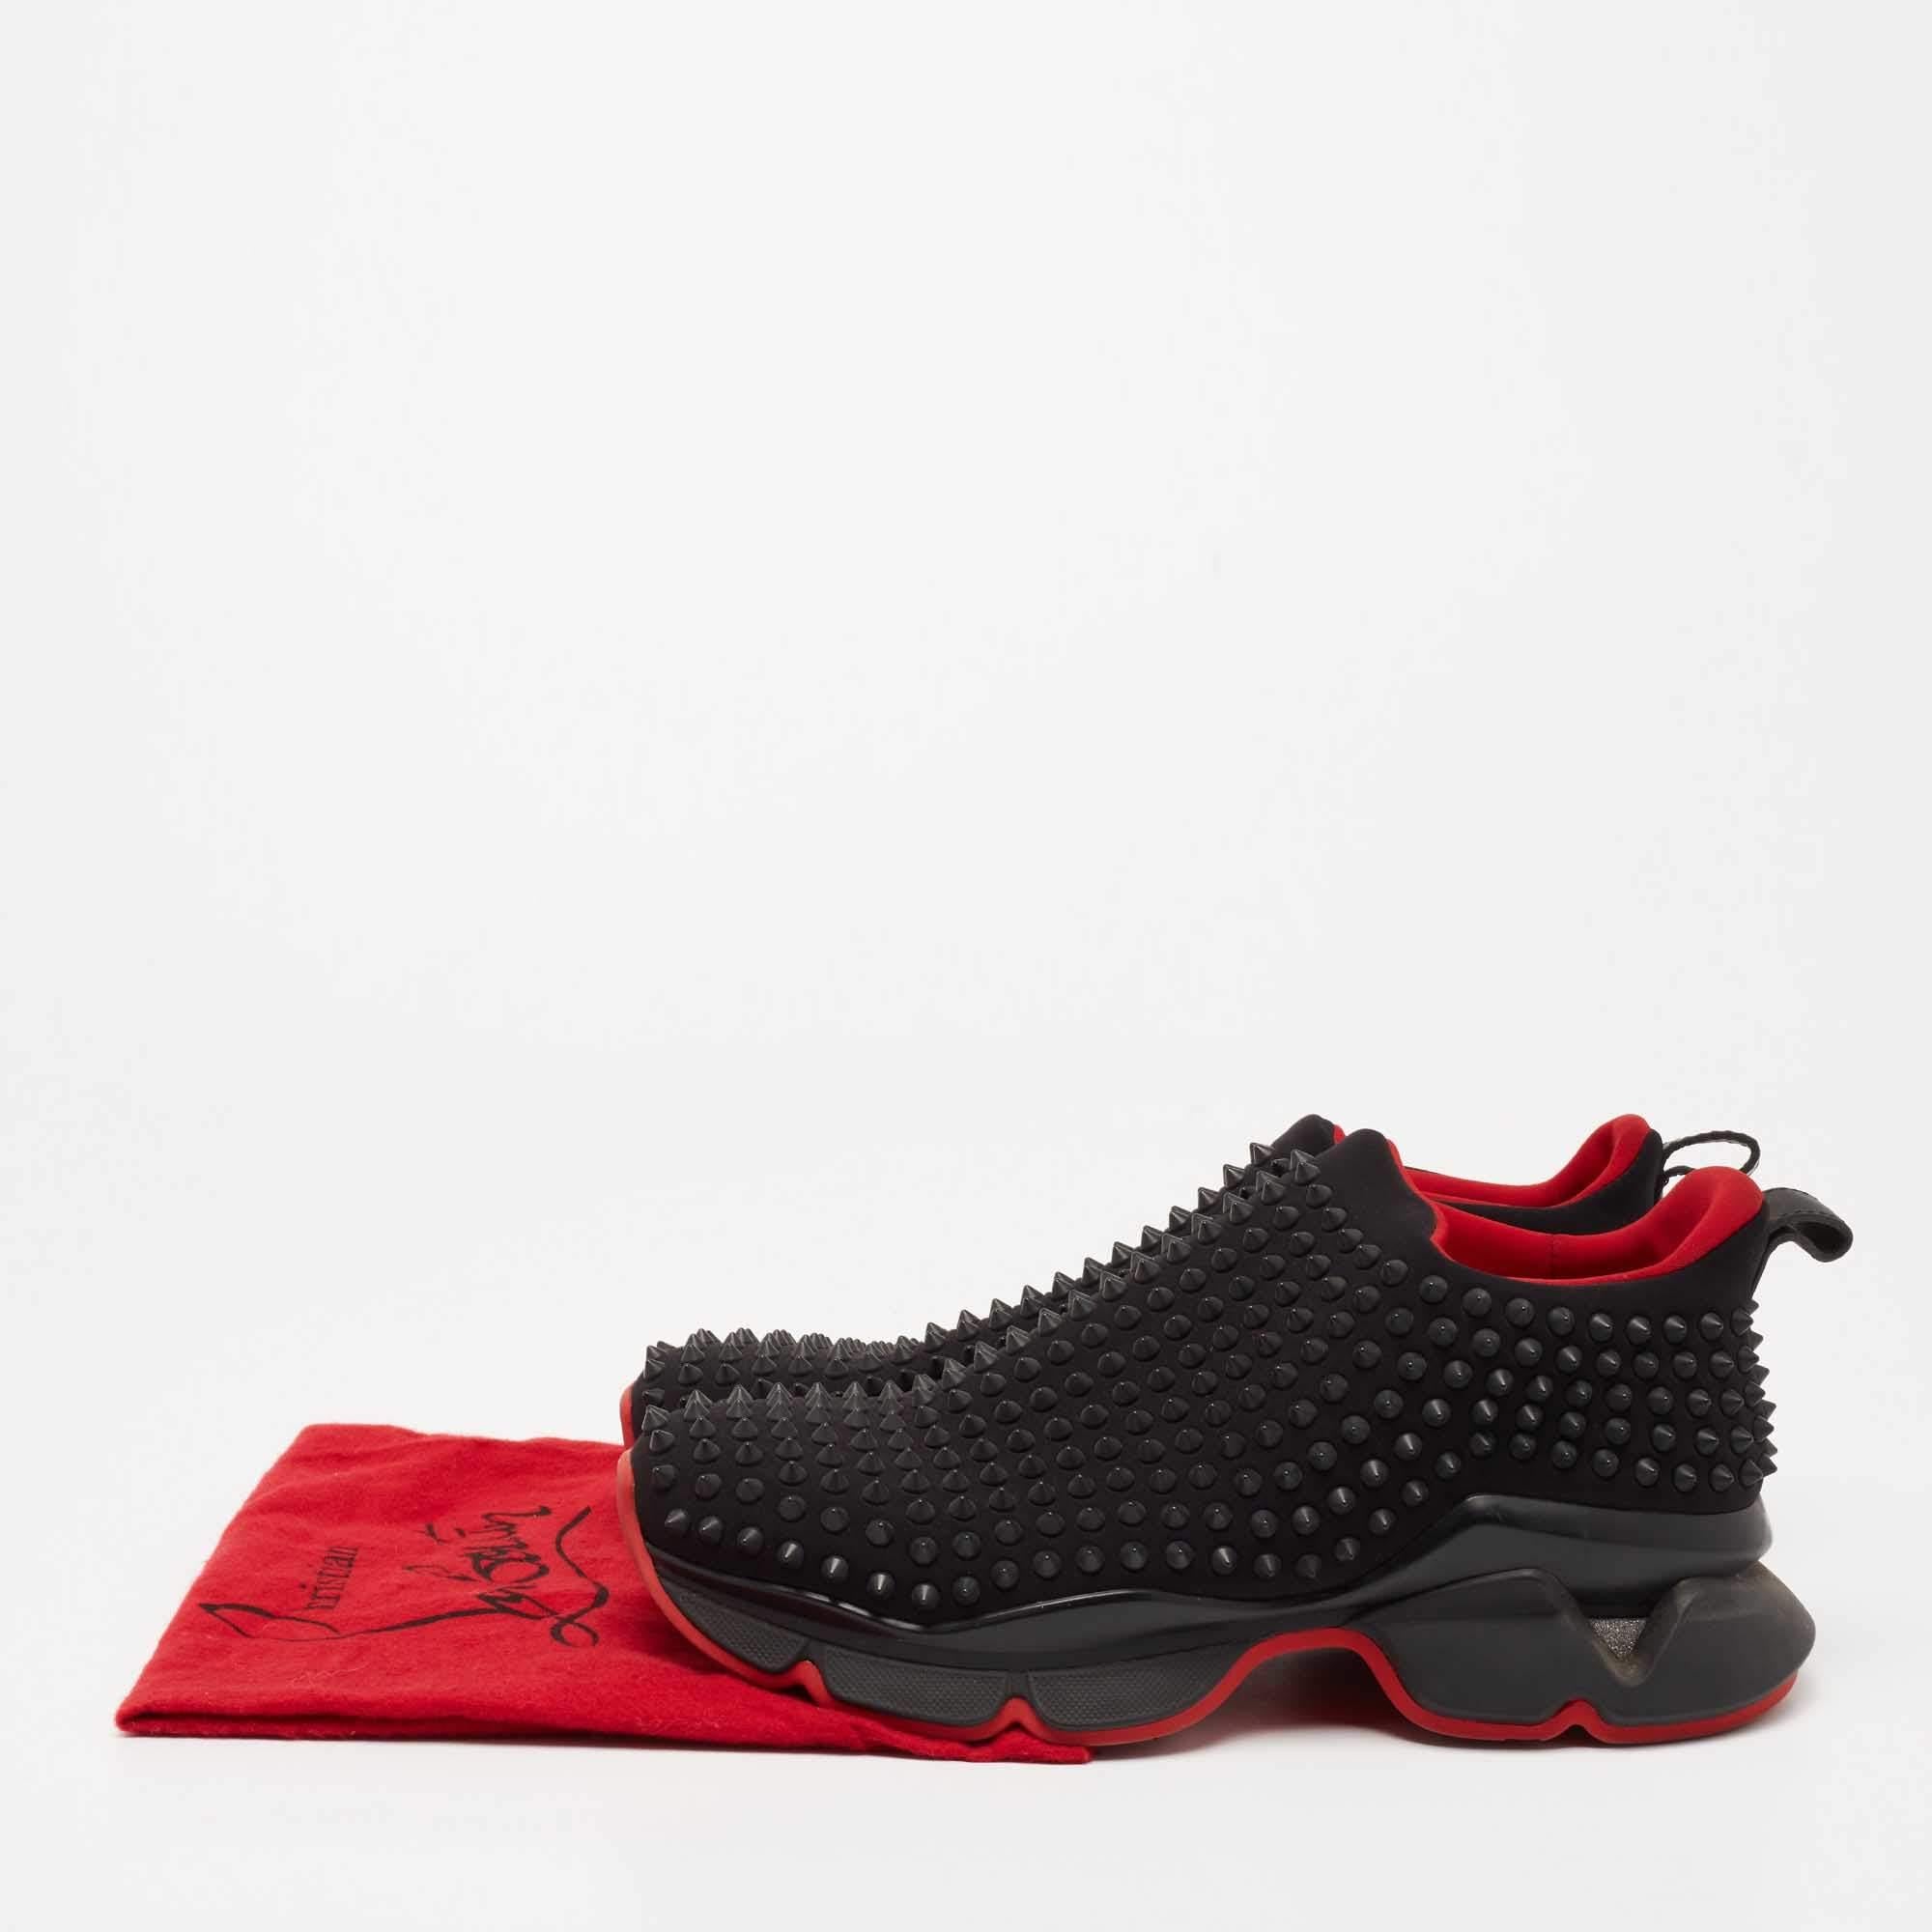 Christian Louboutin Black Stretch Fabric Spike Sock Slip On Sneakers Size 40.5 For Sale 3